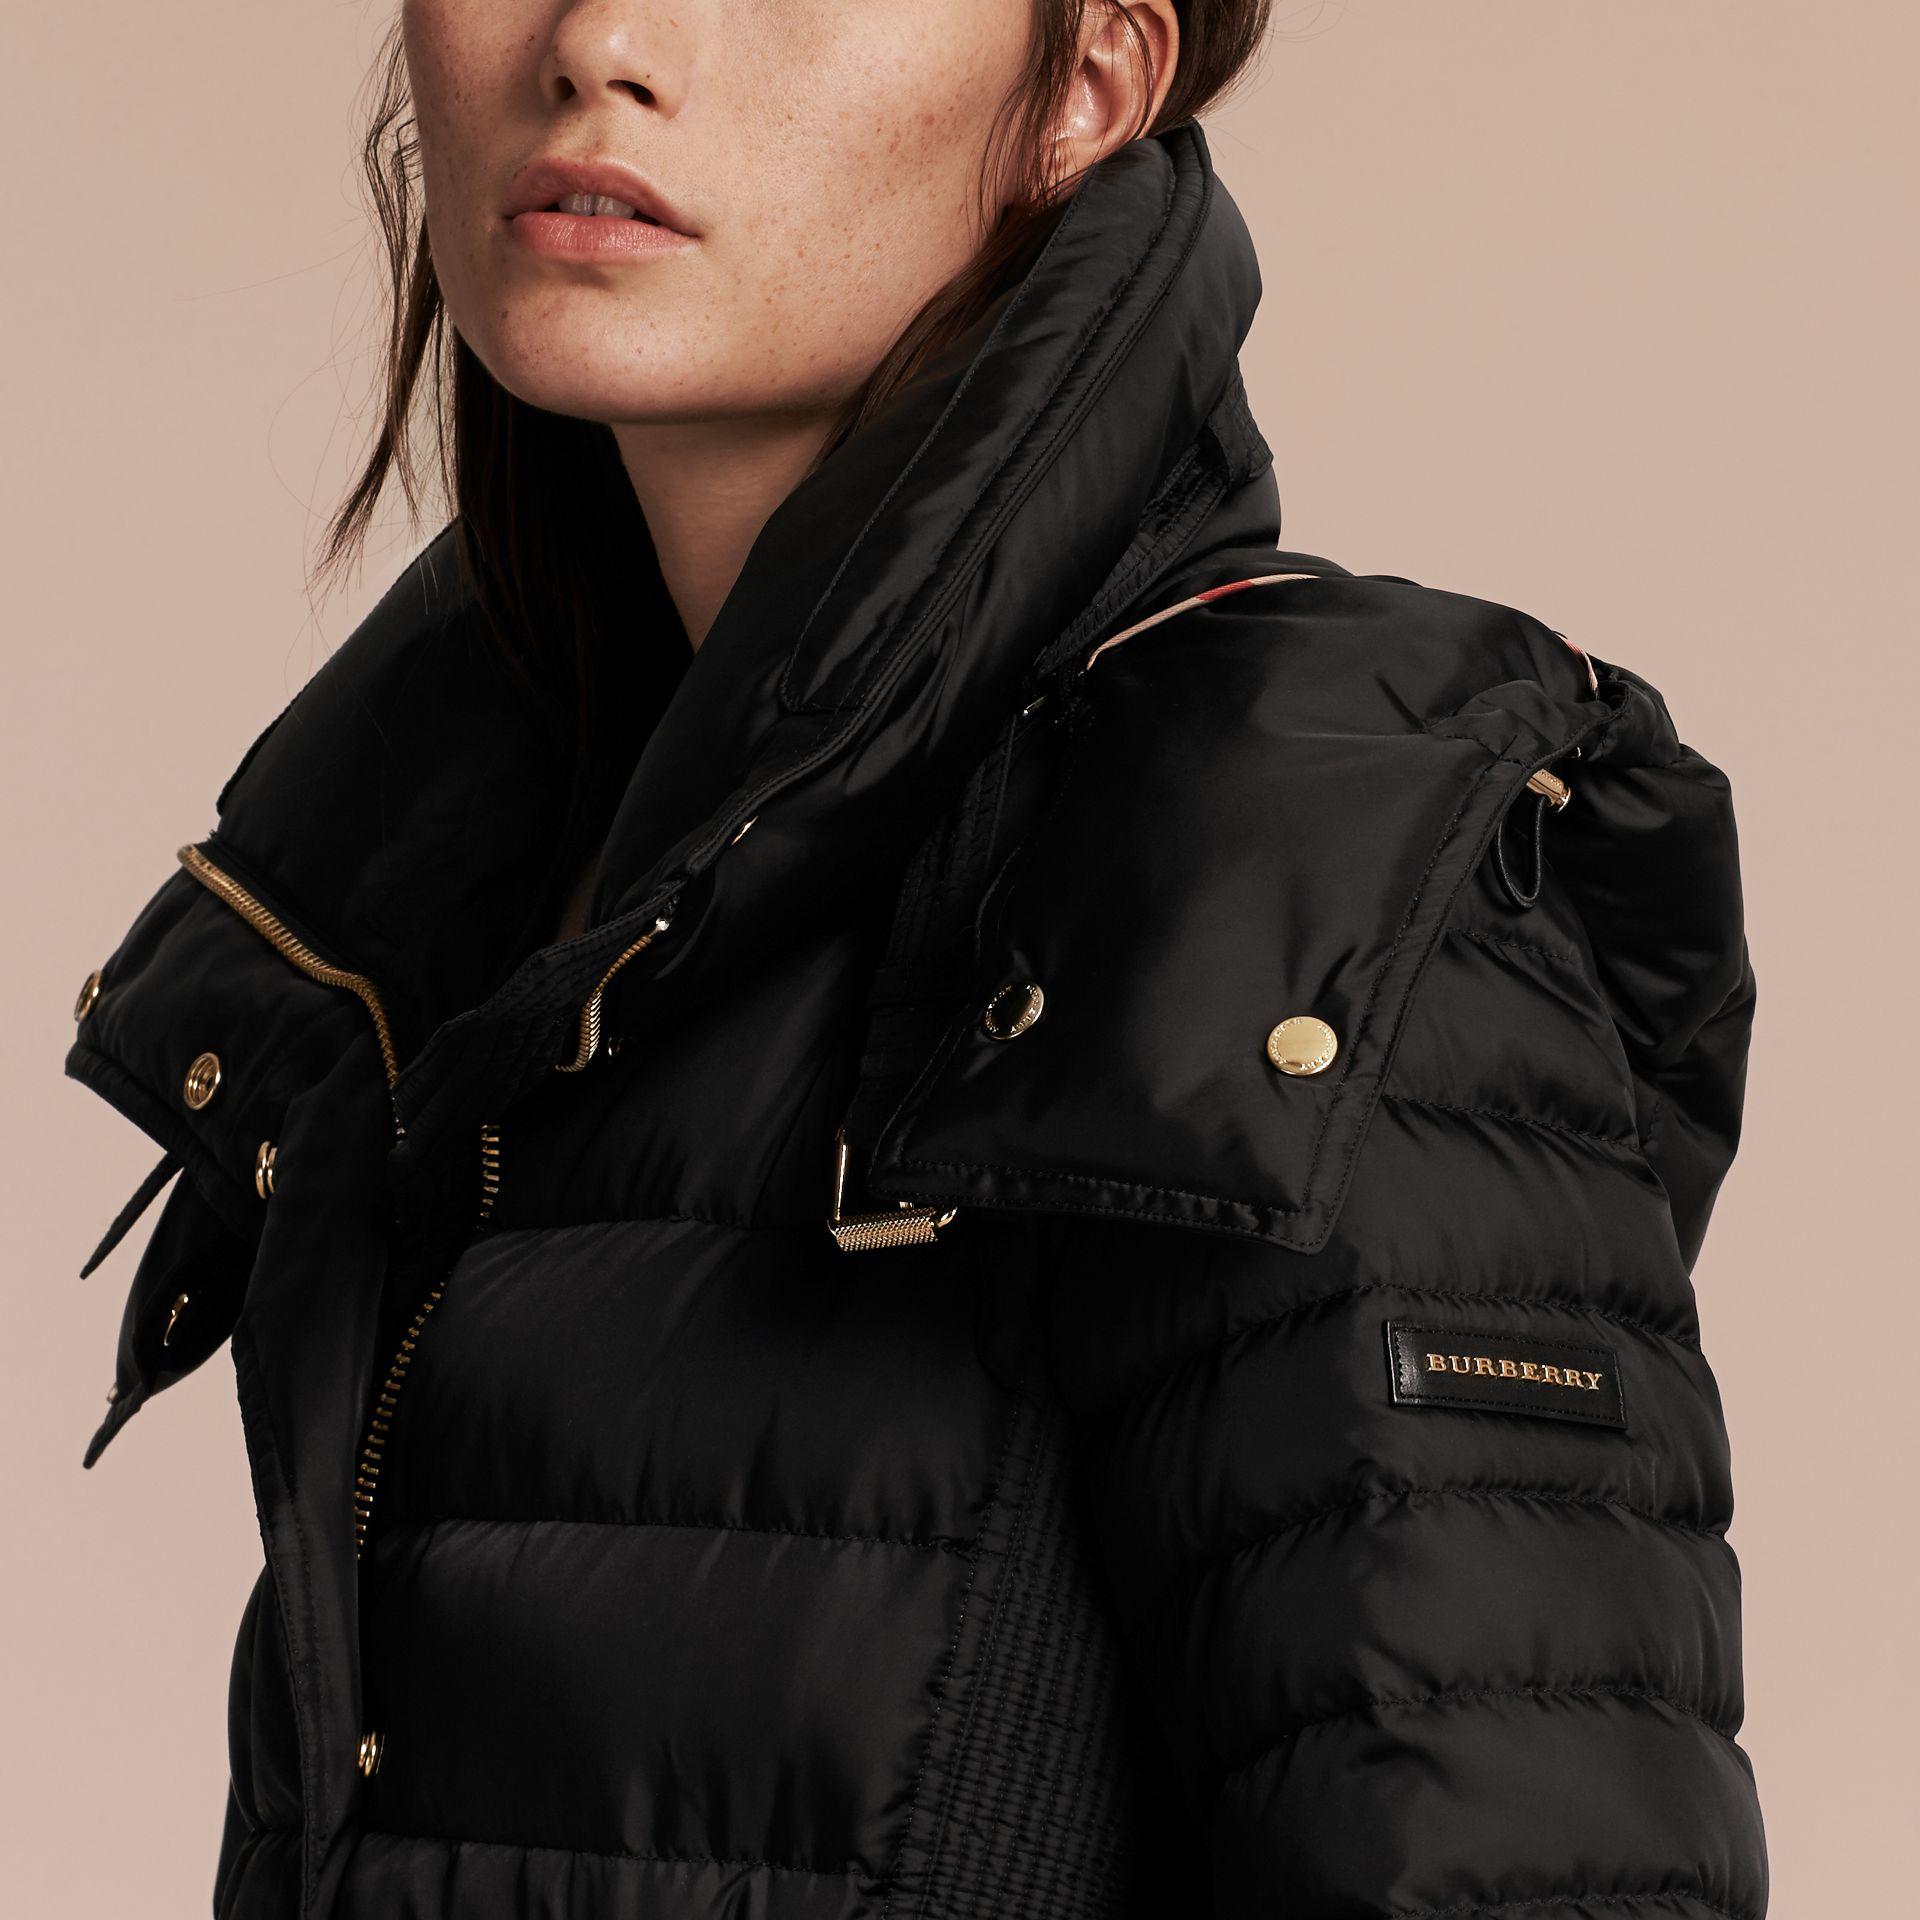 Lyst - Burberry Down-filled Puffer Coat With Packaway Hood in Black